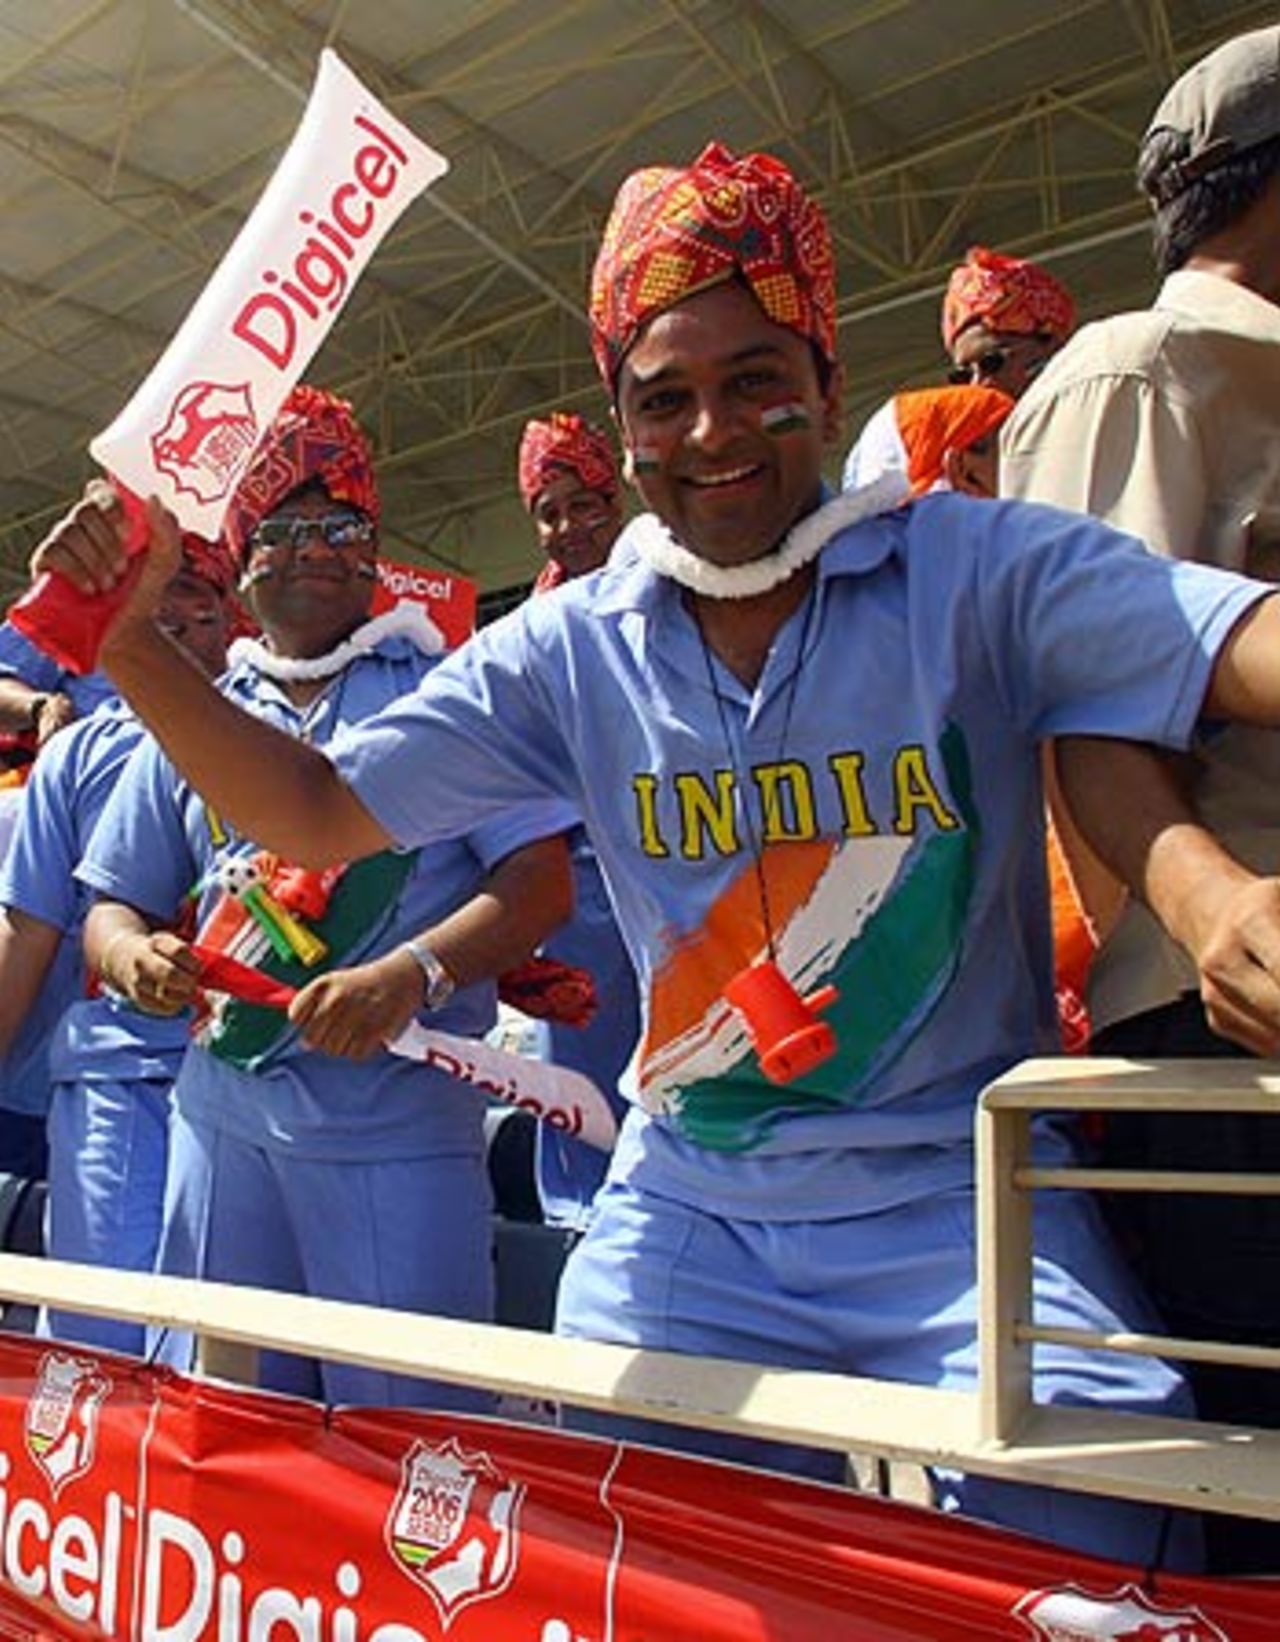 An Indian fan shows just why it was worth the trip to Kingston, West Indies v India, 2nd ODI, Kingston, May 20, 2006